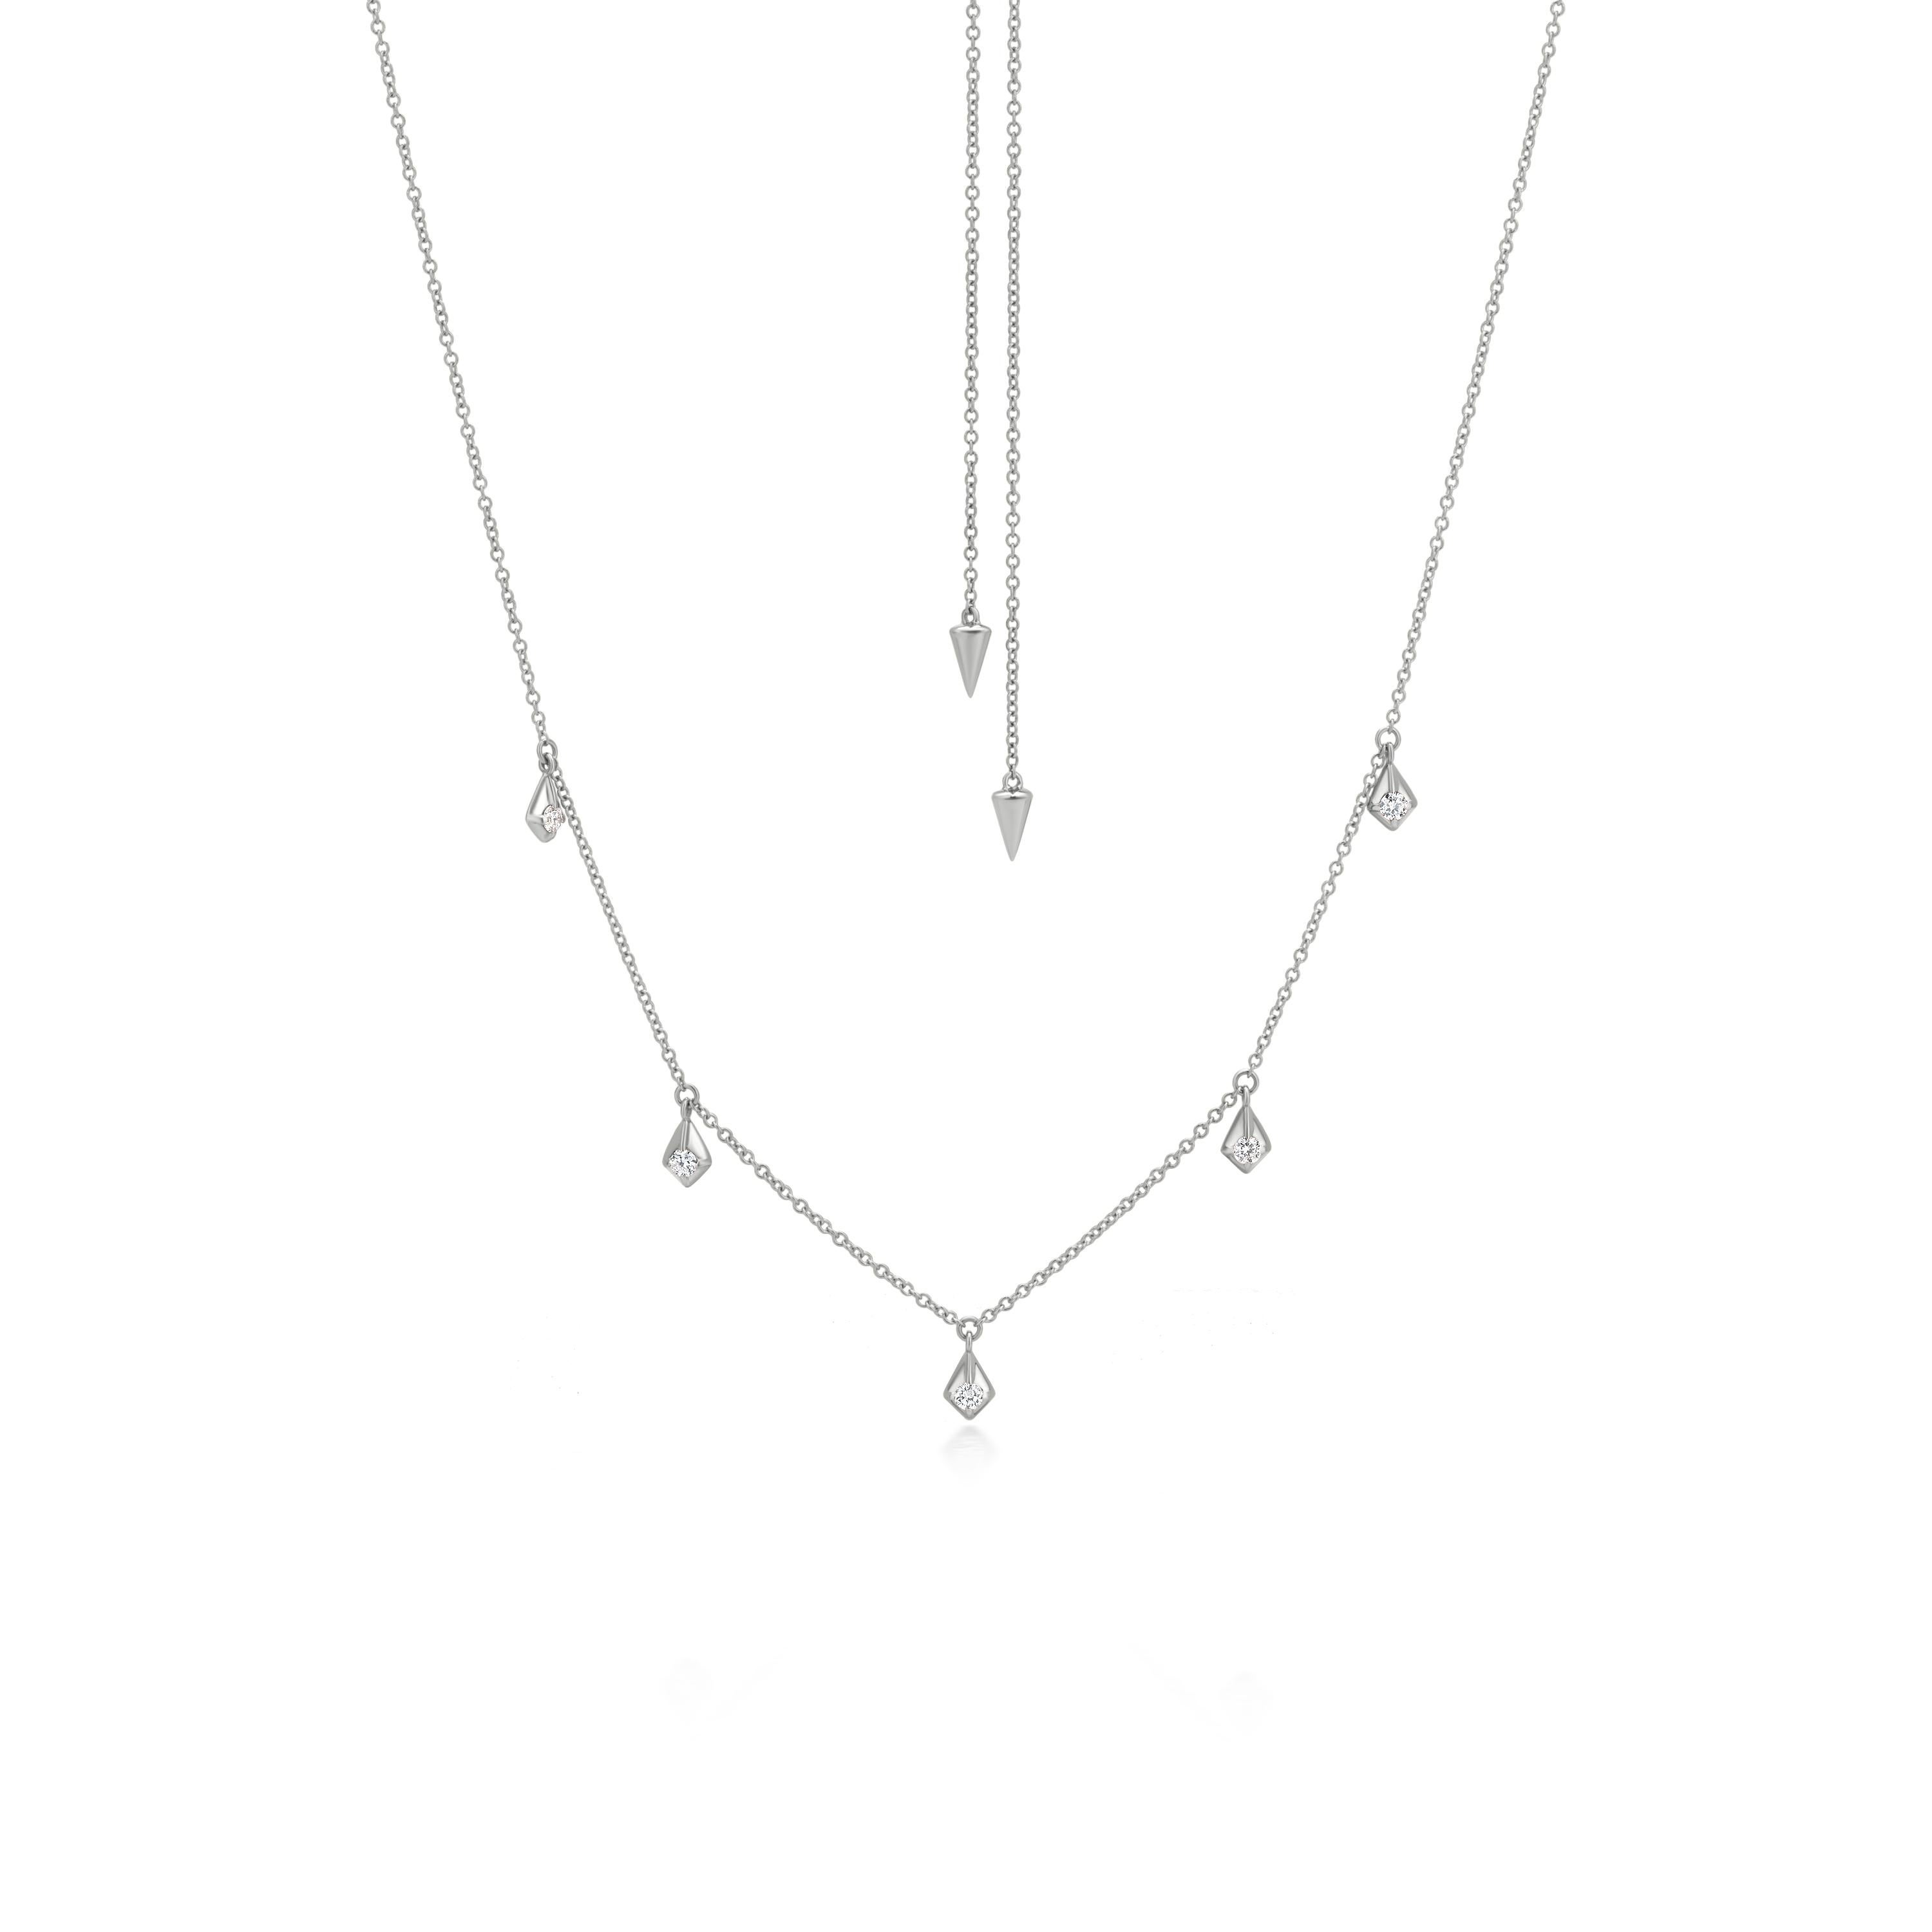 This Luxle magnificent 14K White Gold necklace, reimagined by the artisans, is a timeless motif. Several diamond-shaped motifs studded with 0.36 Ct round full-cut diamonds cascade down the gold chain, creating an elegant touch. A box clasp is